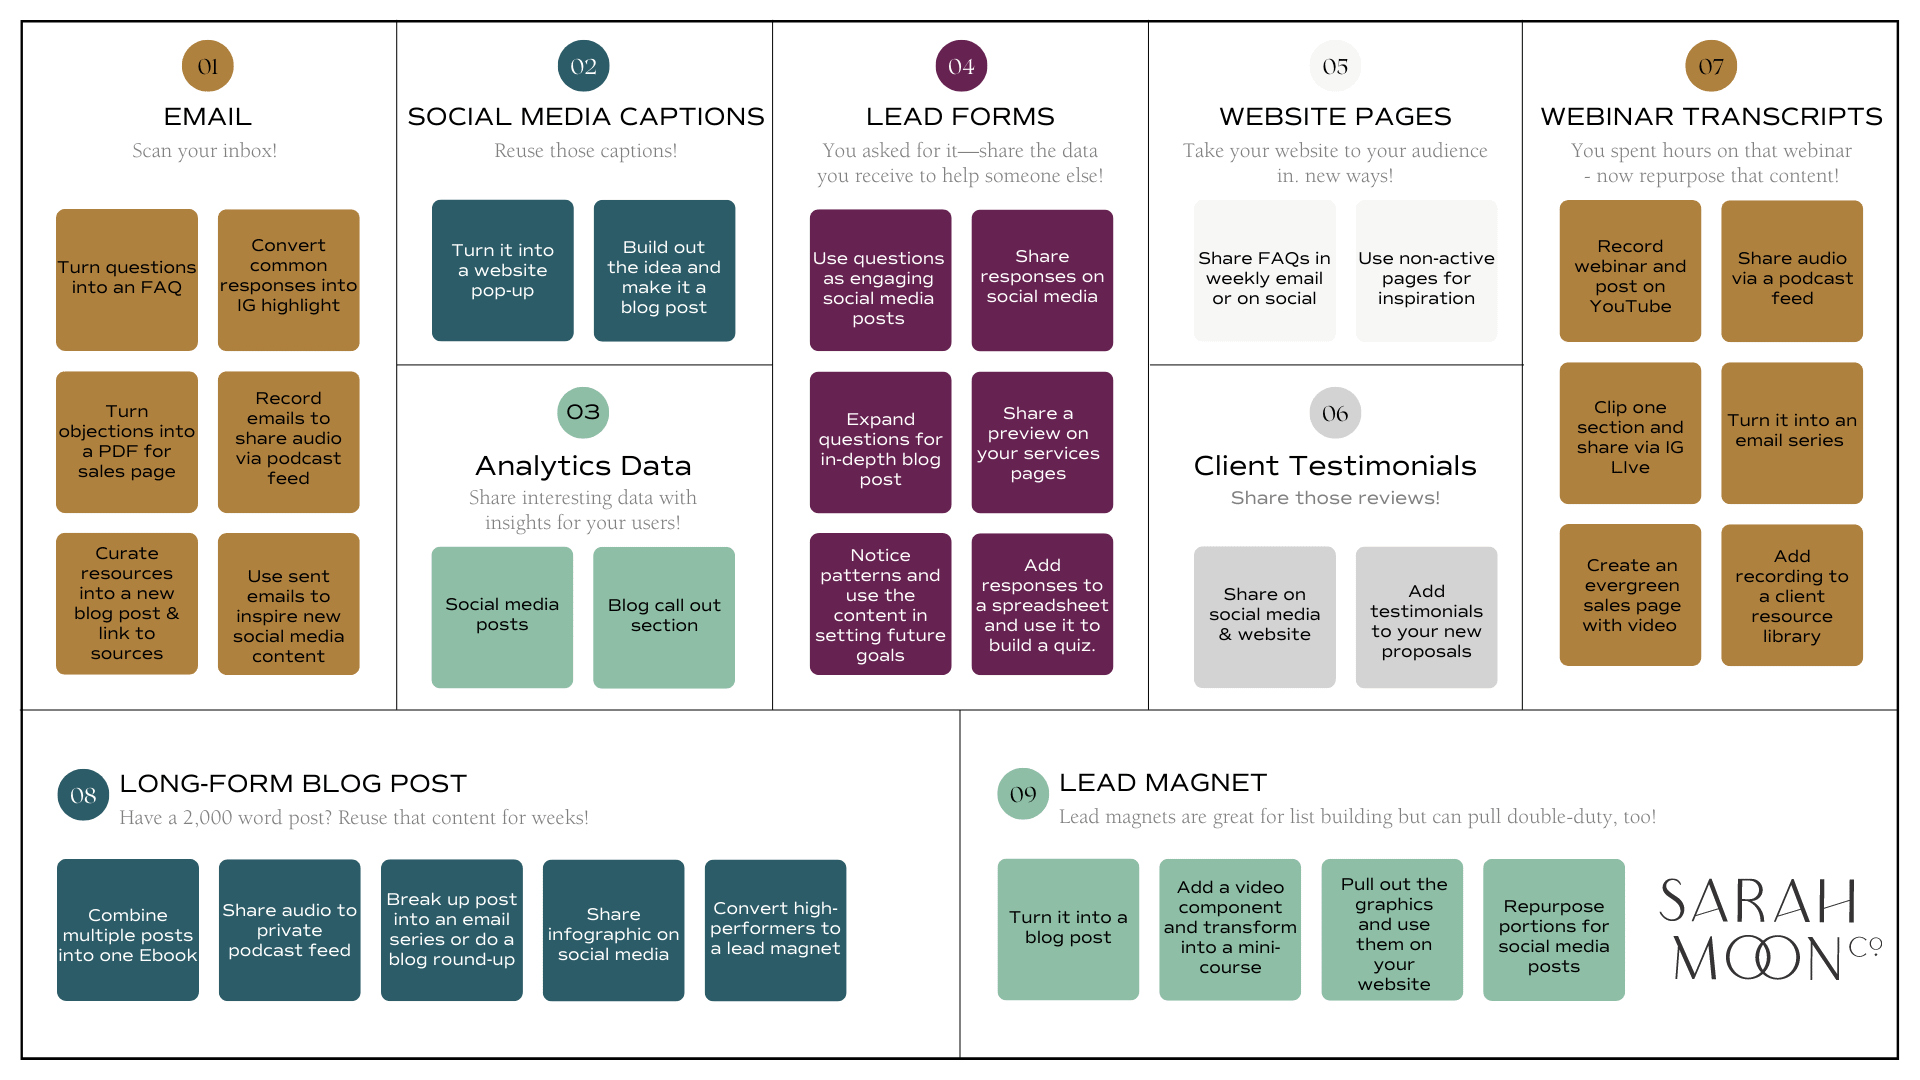 Example Workflow for Reusing Content